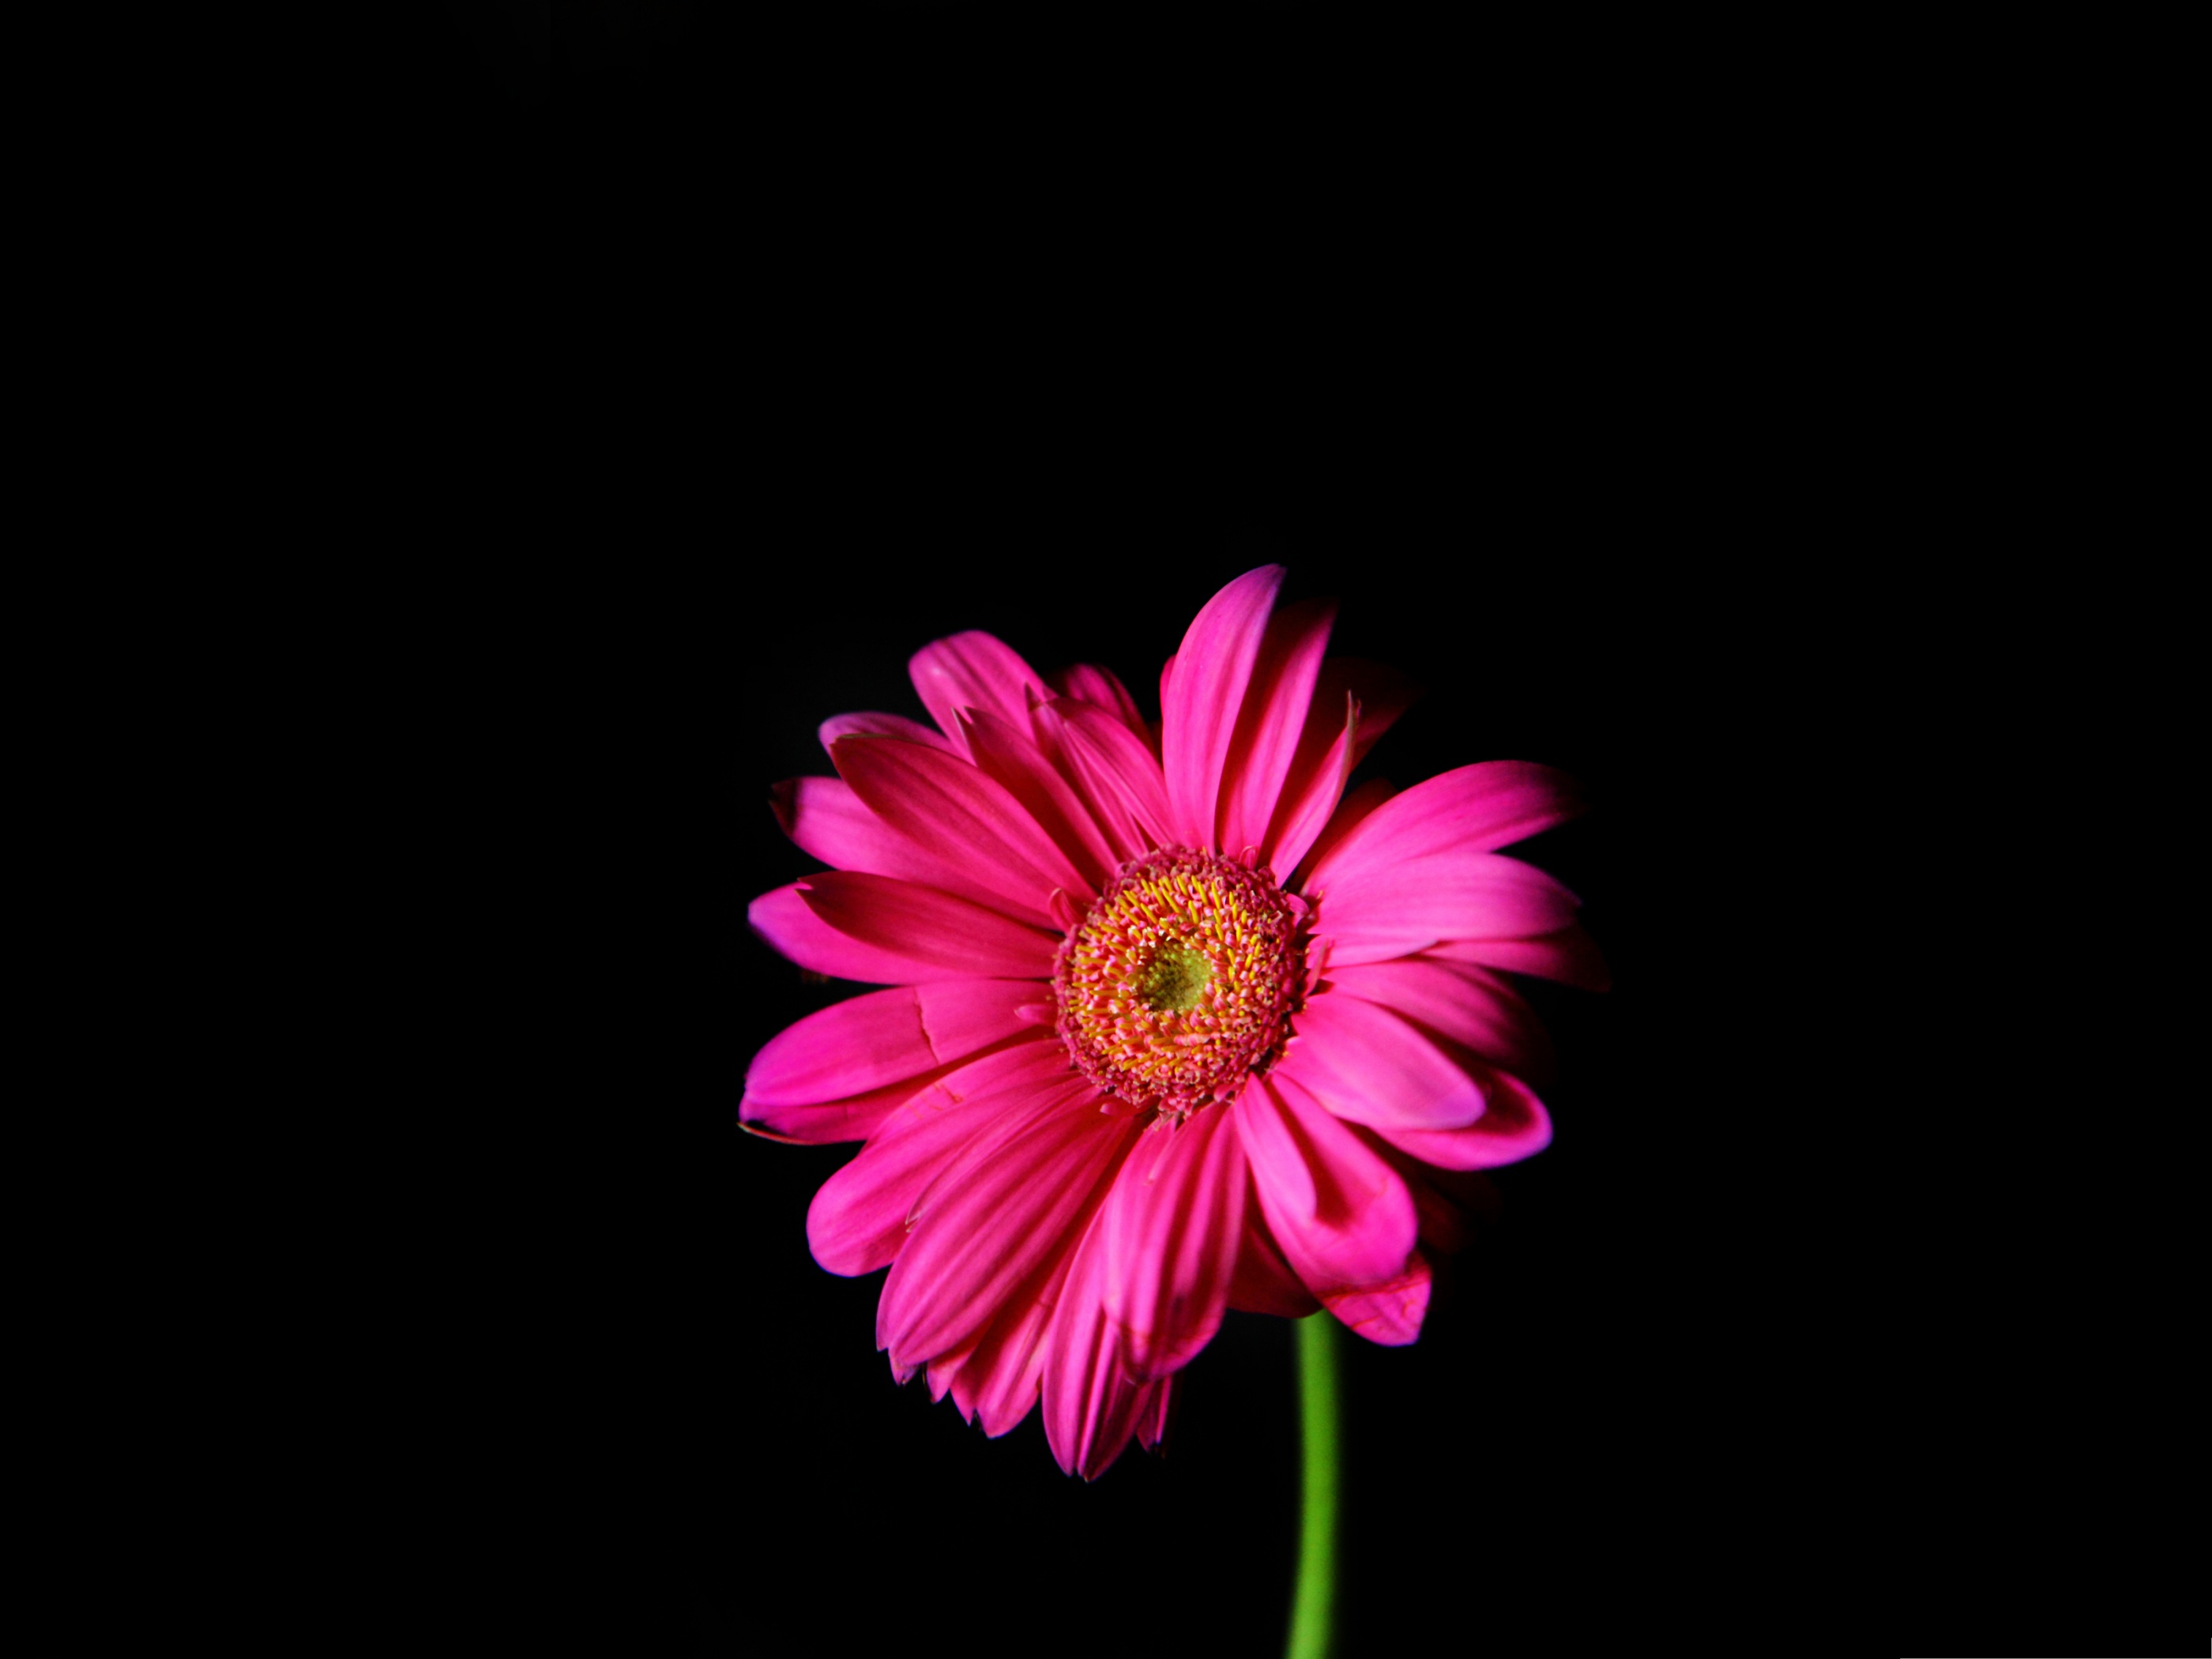 Wallpapers for Computer Free, Hot Pink Gerber Daisy on Dark ...